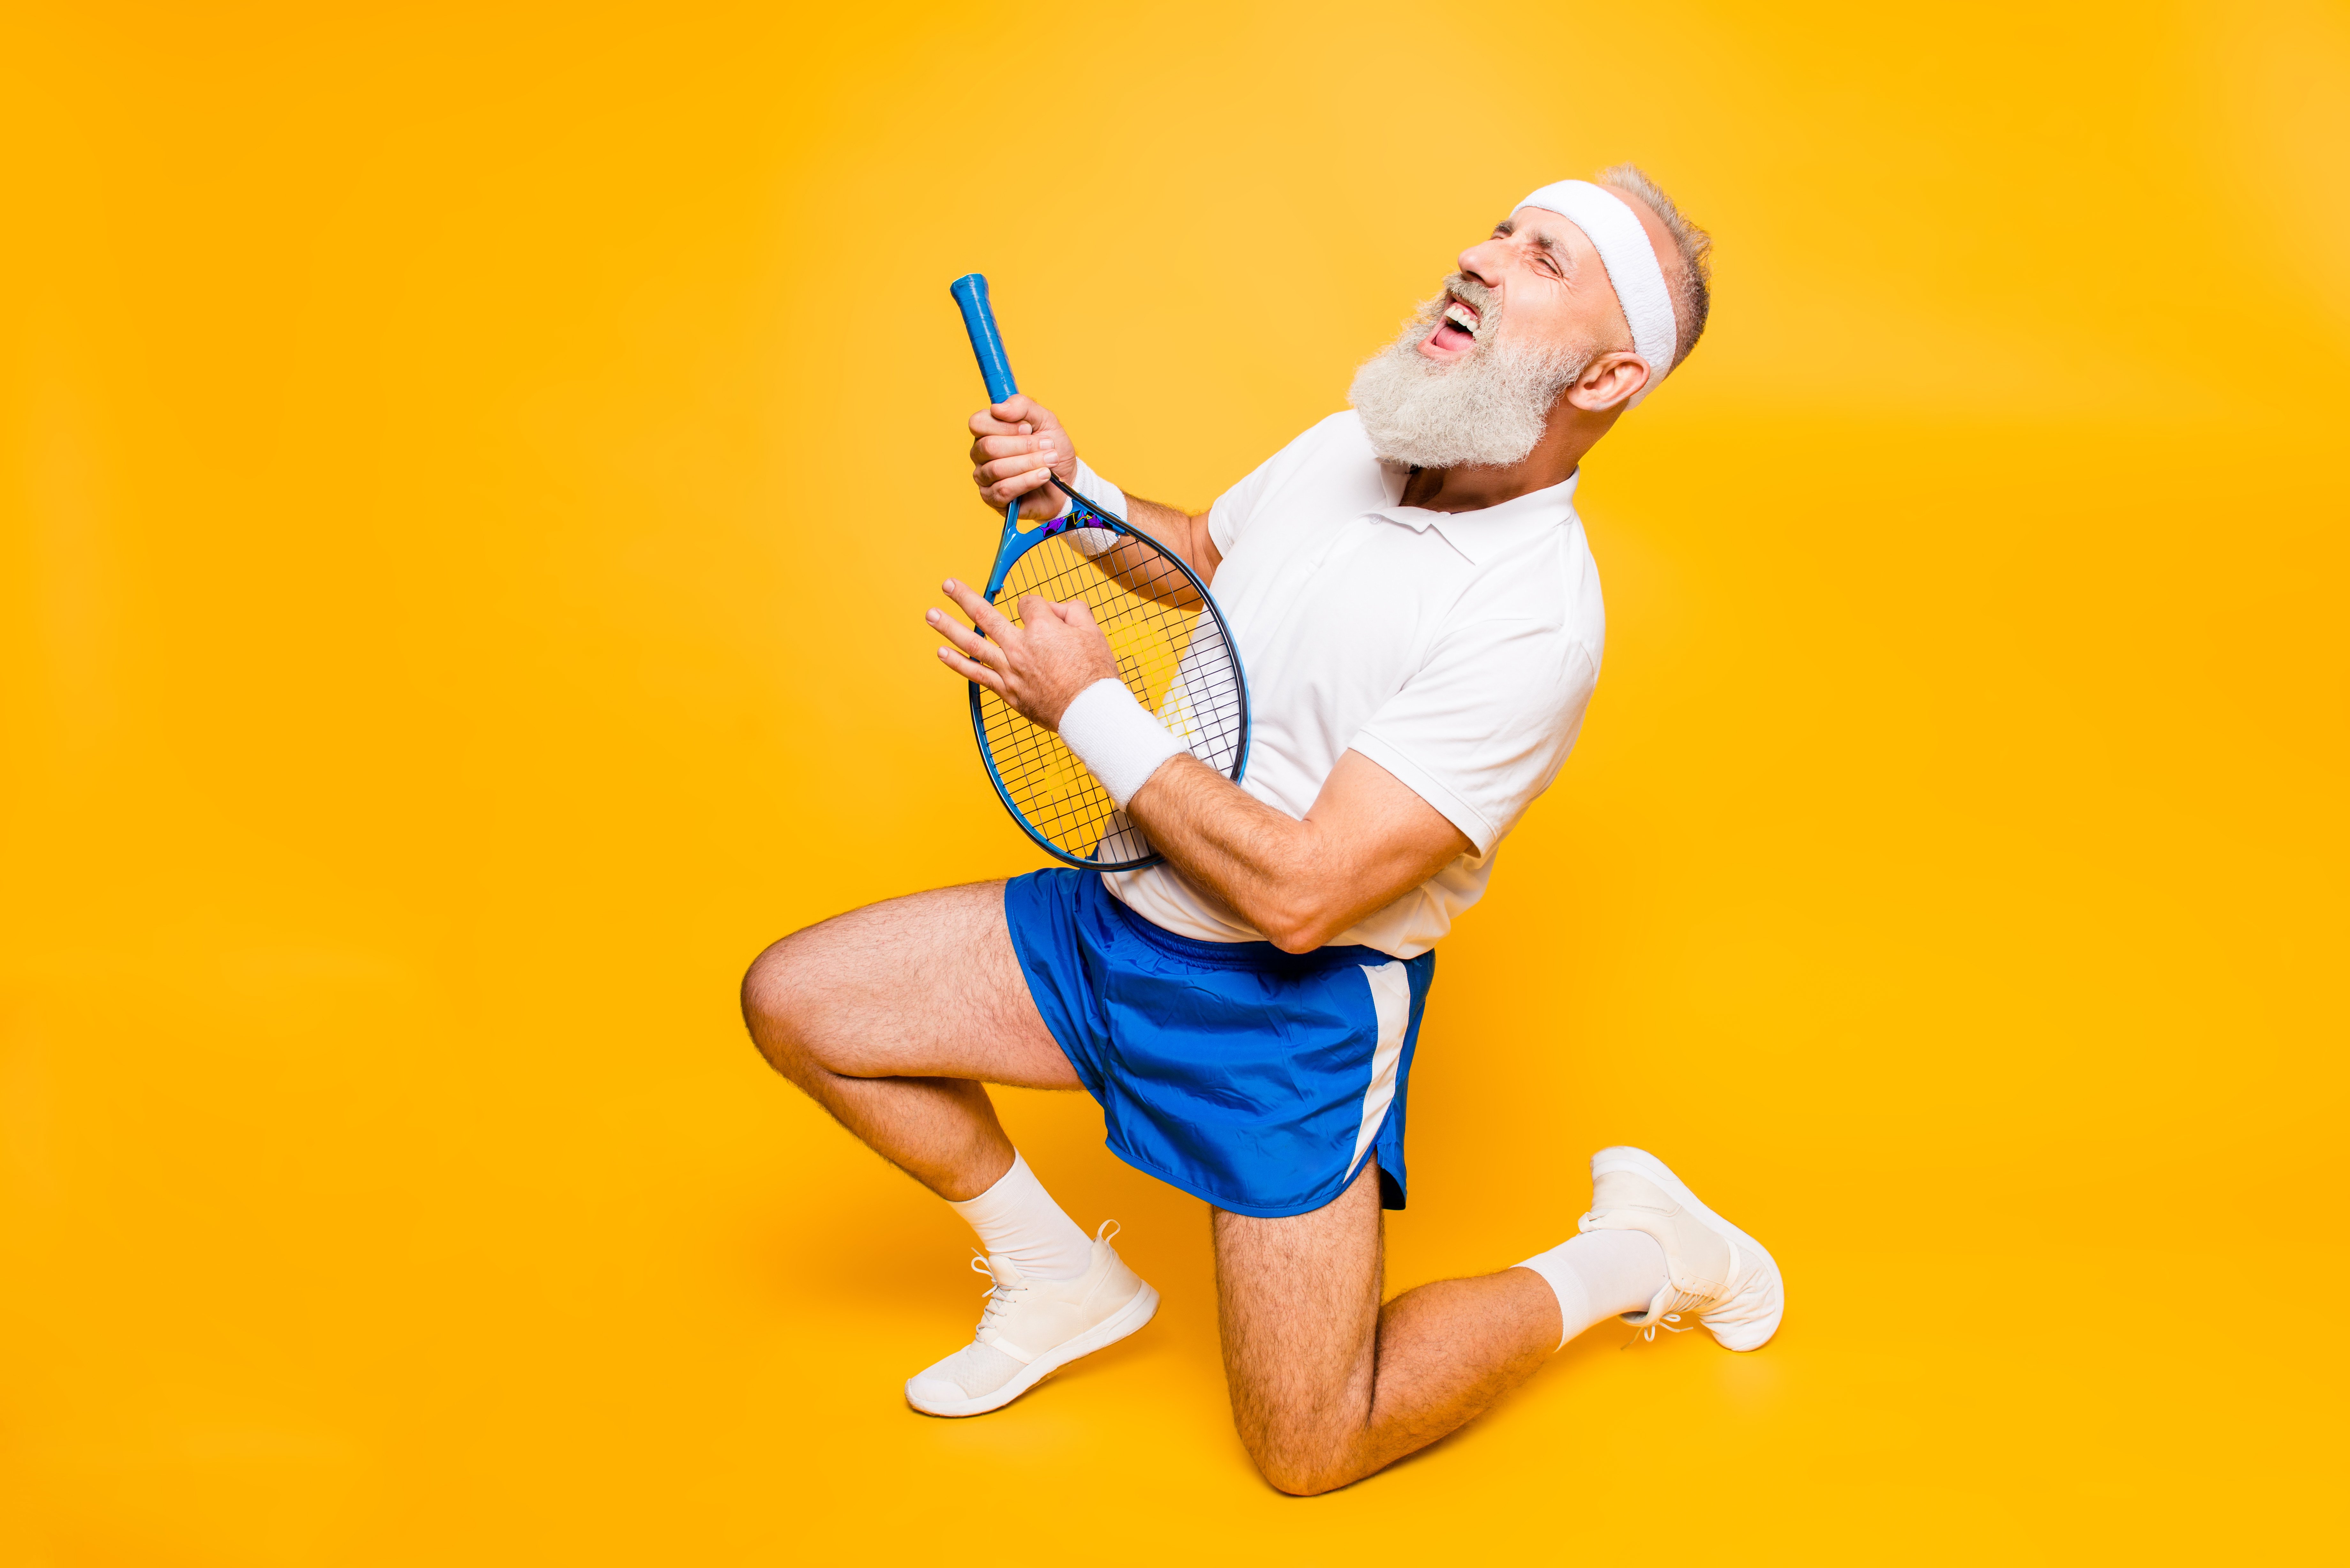 Playing tennis isn't the only cause of tennis elbow